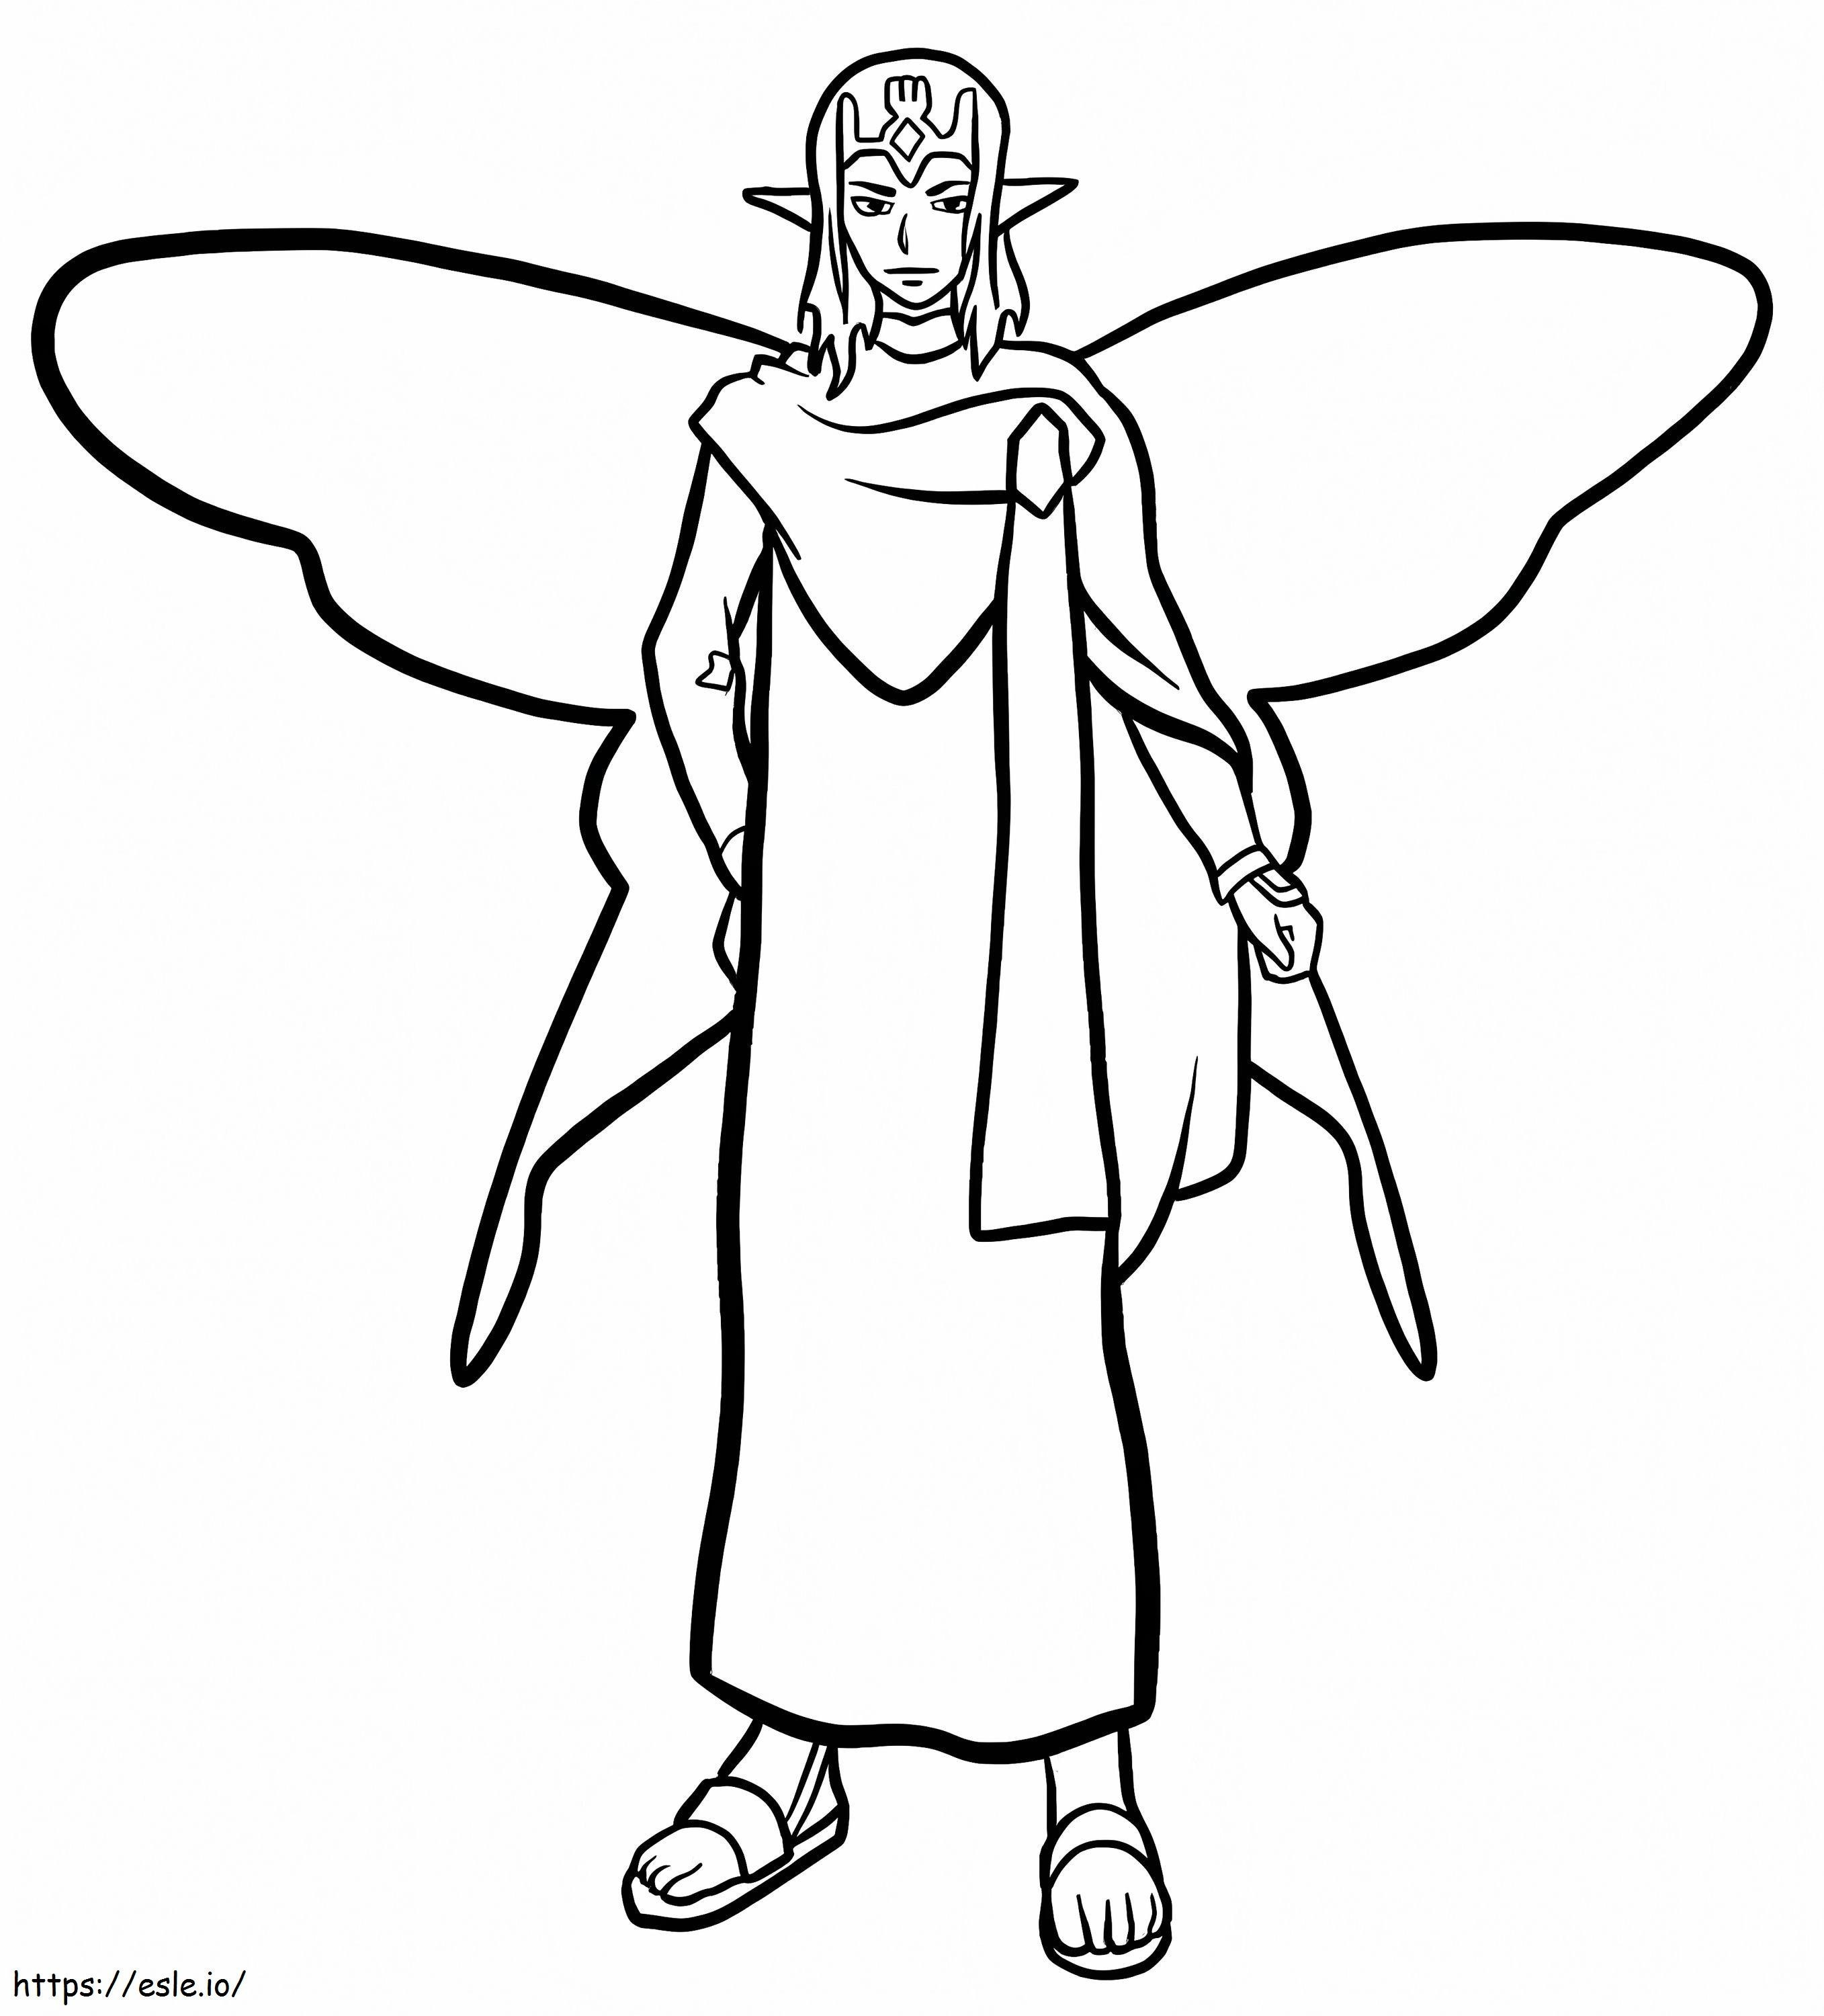 Obeiron coloring page